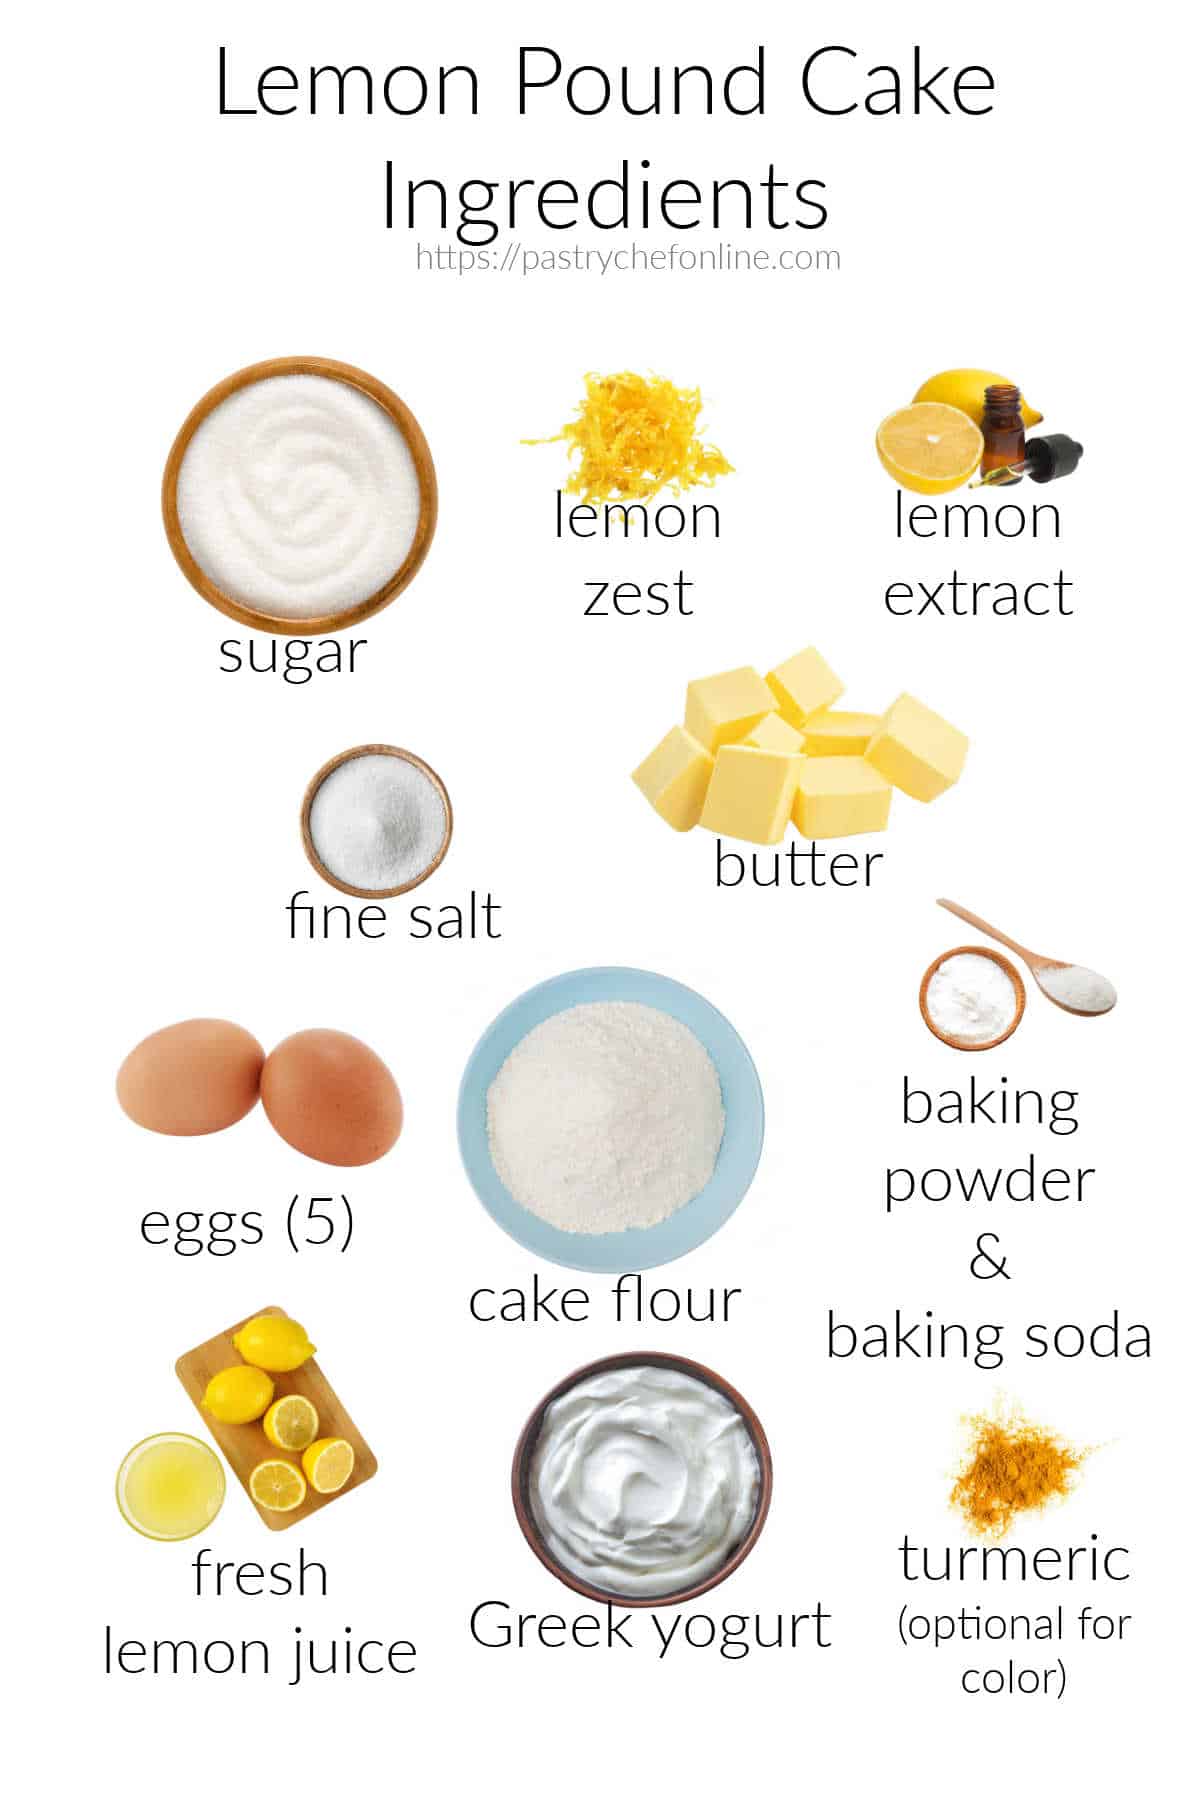 All the ingredients for making a lemon pound cake, labeled and on a white background.